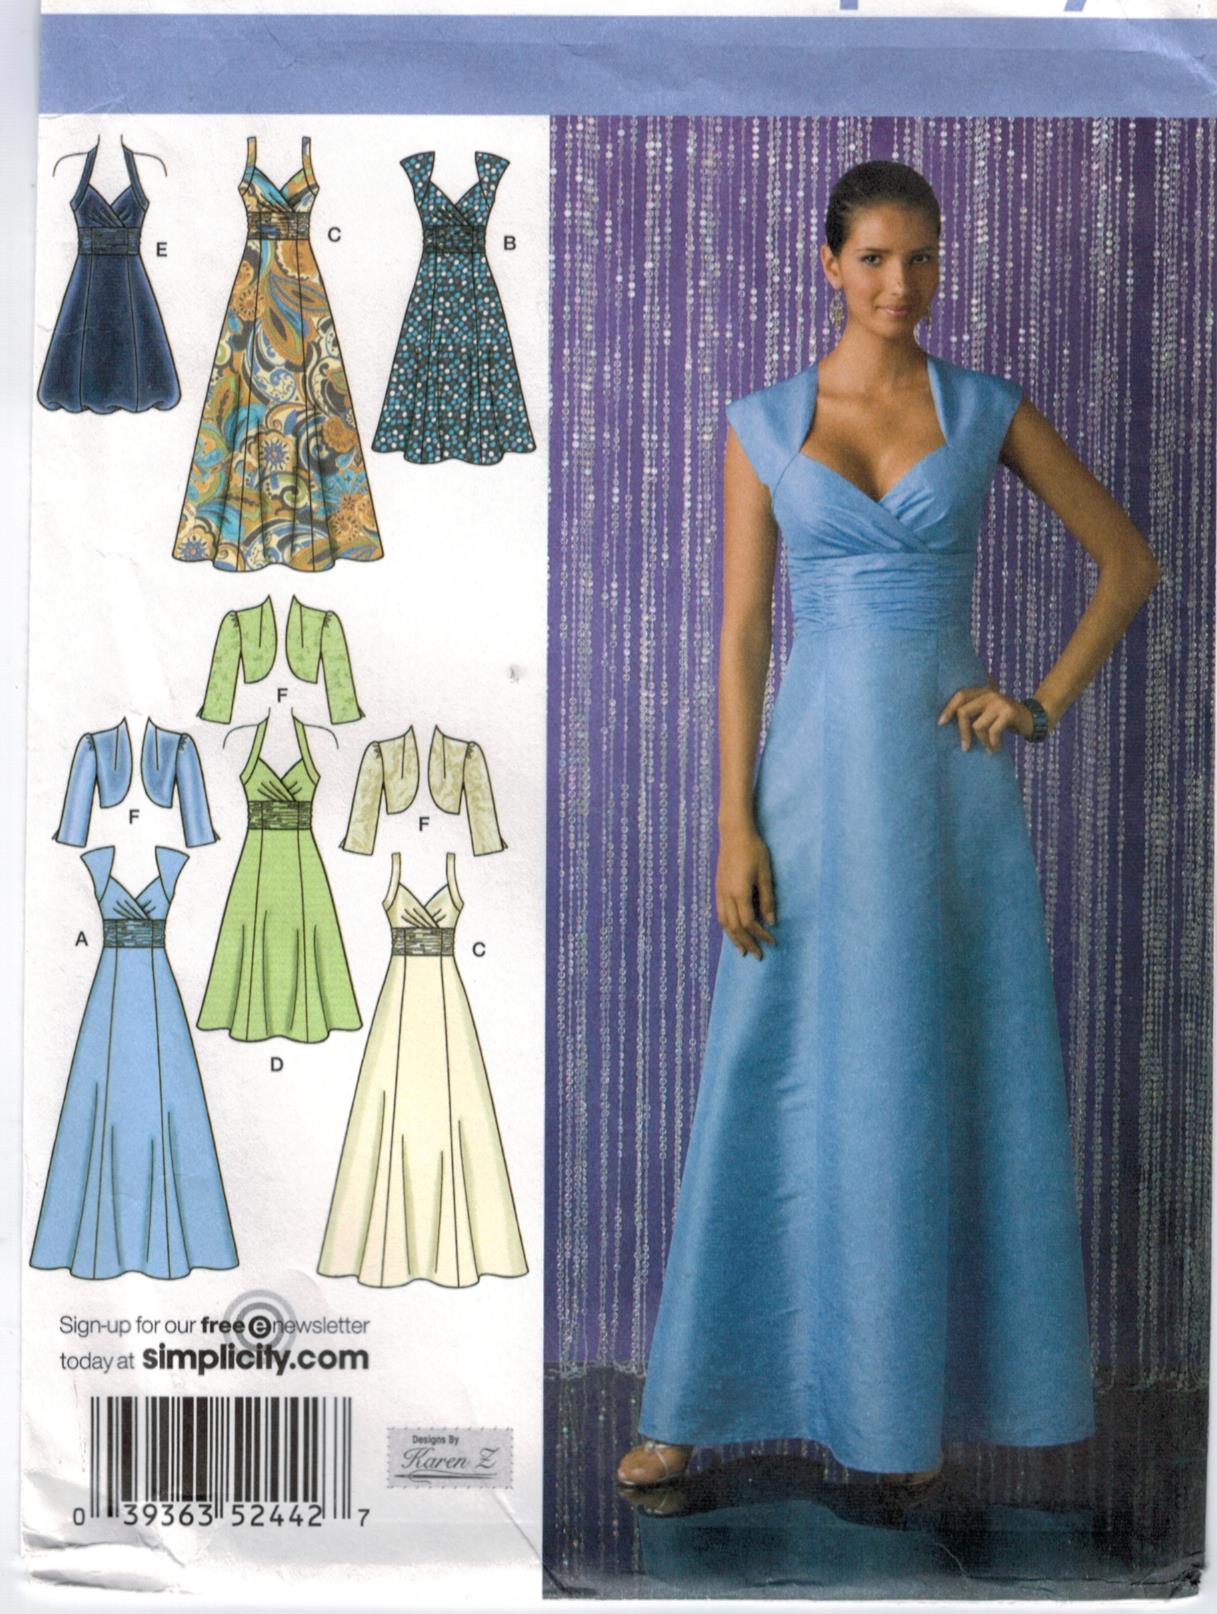 Simplicity Pattern 2442 Misses Gown and Dress Pattern with Bolero Jacket  Designed by Karen Z Sizes 6, 8, 10, 12, 14